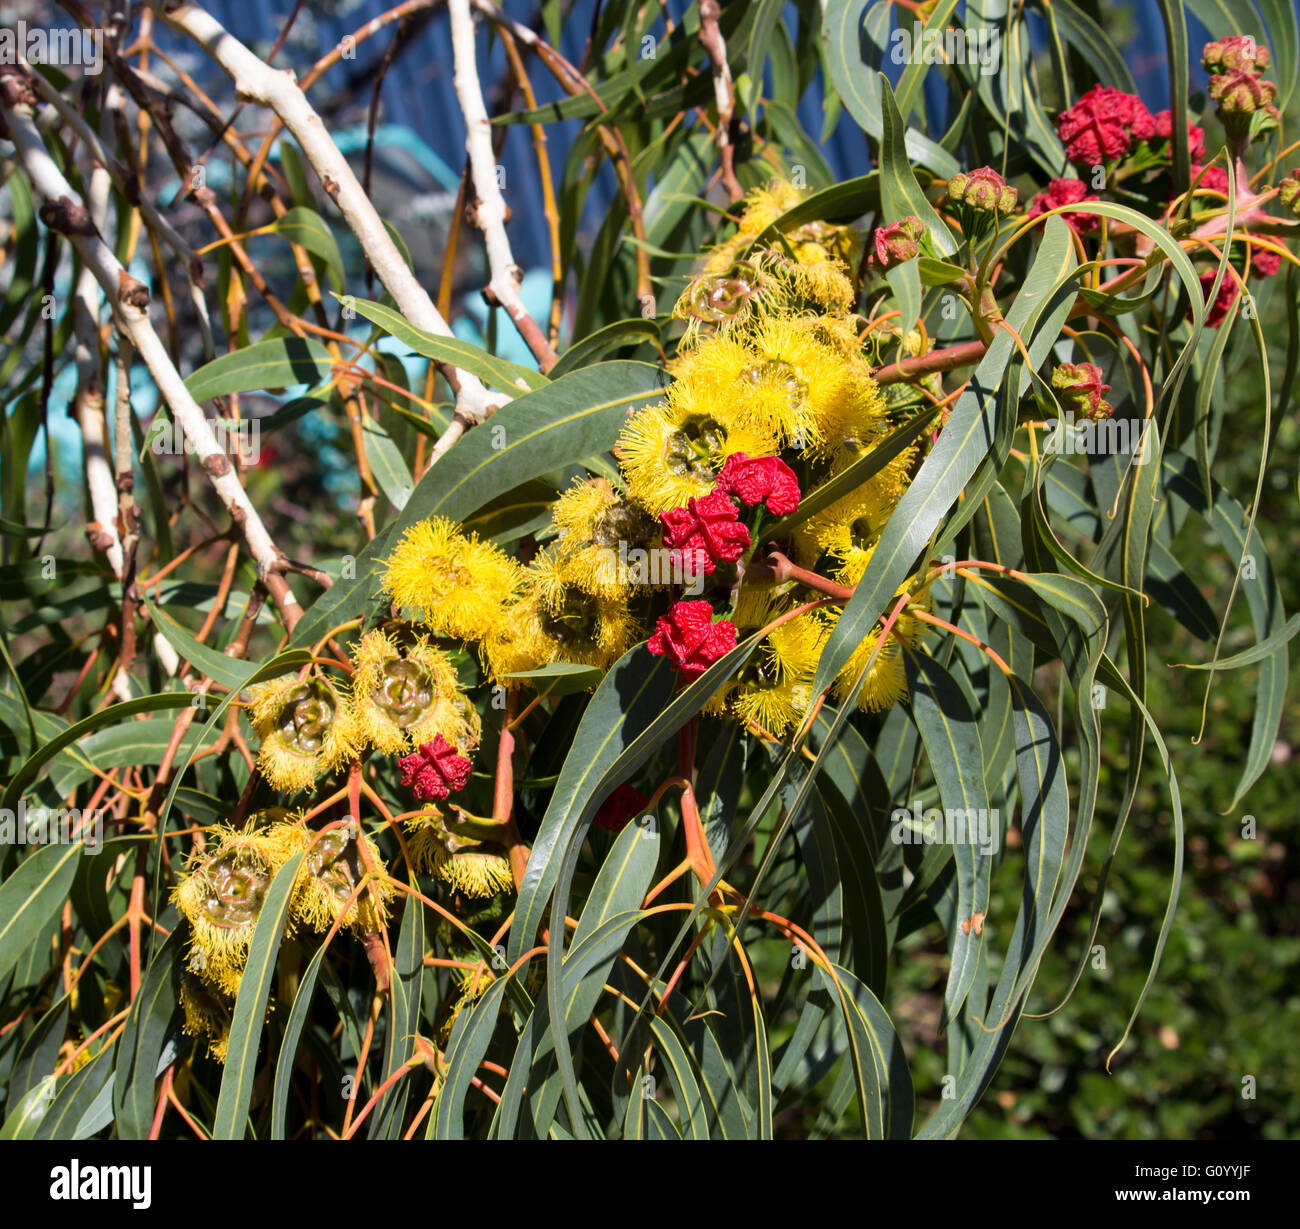 West Australian  Illyarrie mallee tree eucalyptus  erythrocorys  in autumn bloom with red capped large buds  and yellow flowers Stock Photo